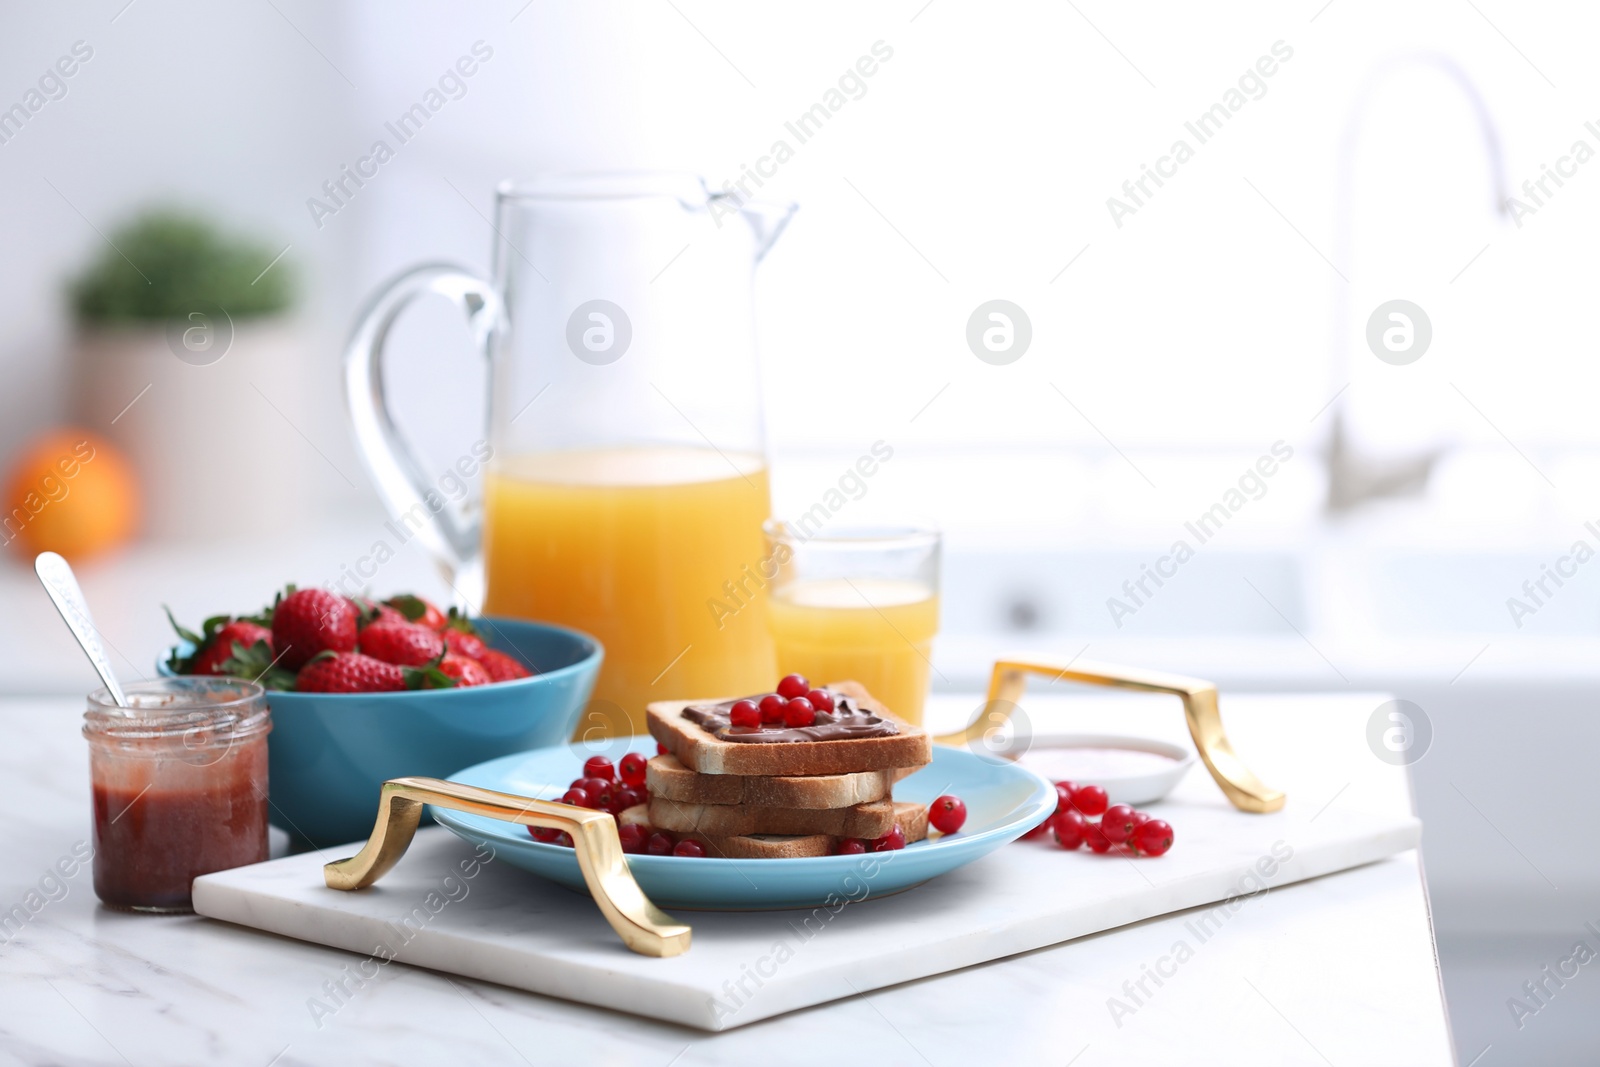 Photo of Toasted bread with chocolate spread and fresh cranberries on white marble table in kitchen